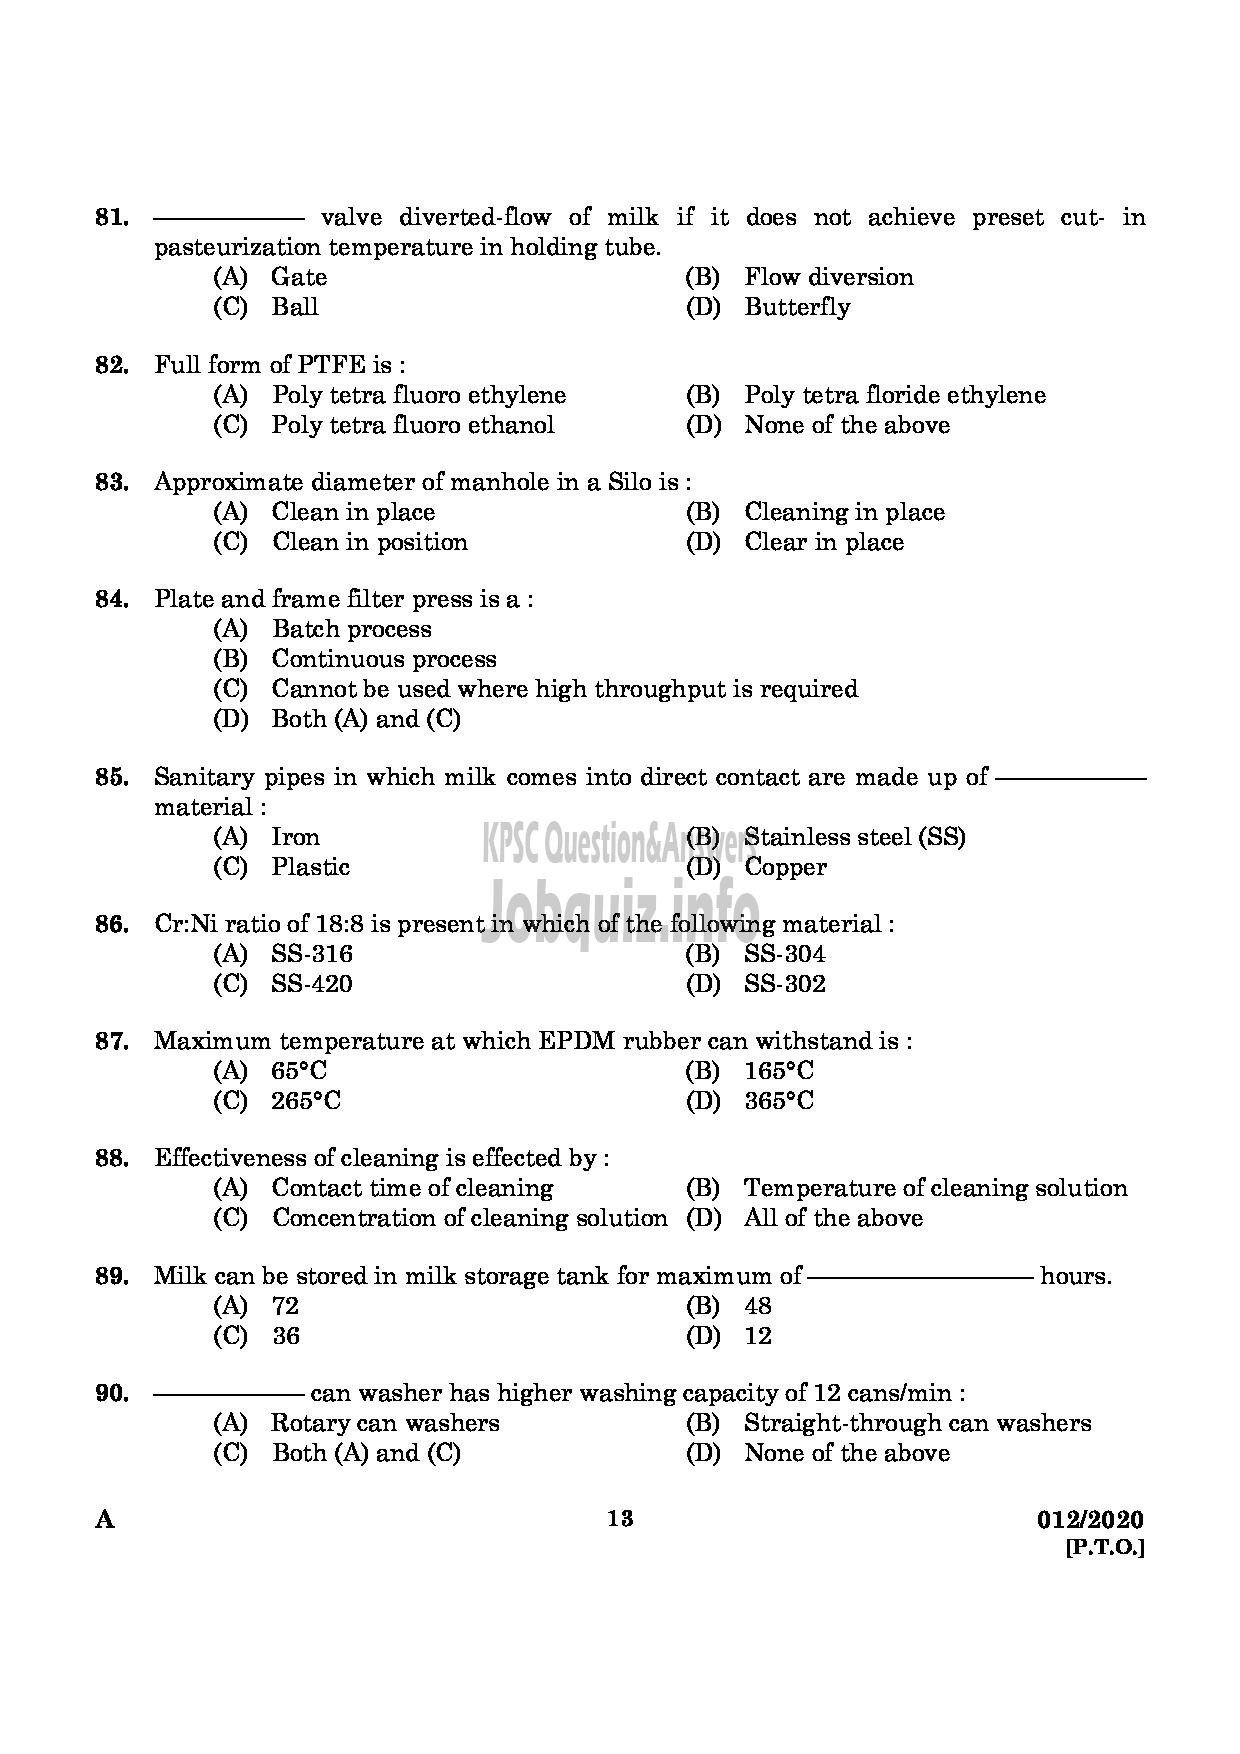 Kerala PSC Question Paper - Technical Superintendent (Engineering) Kerala Co operative Milk Marketing Federation Limited-11